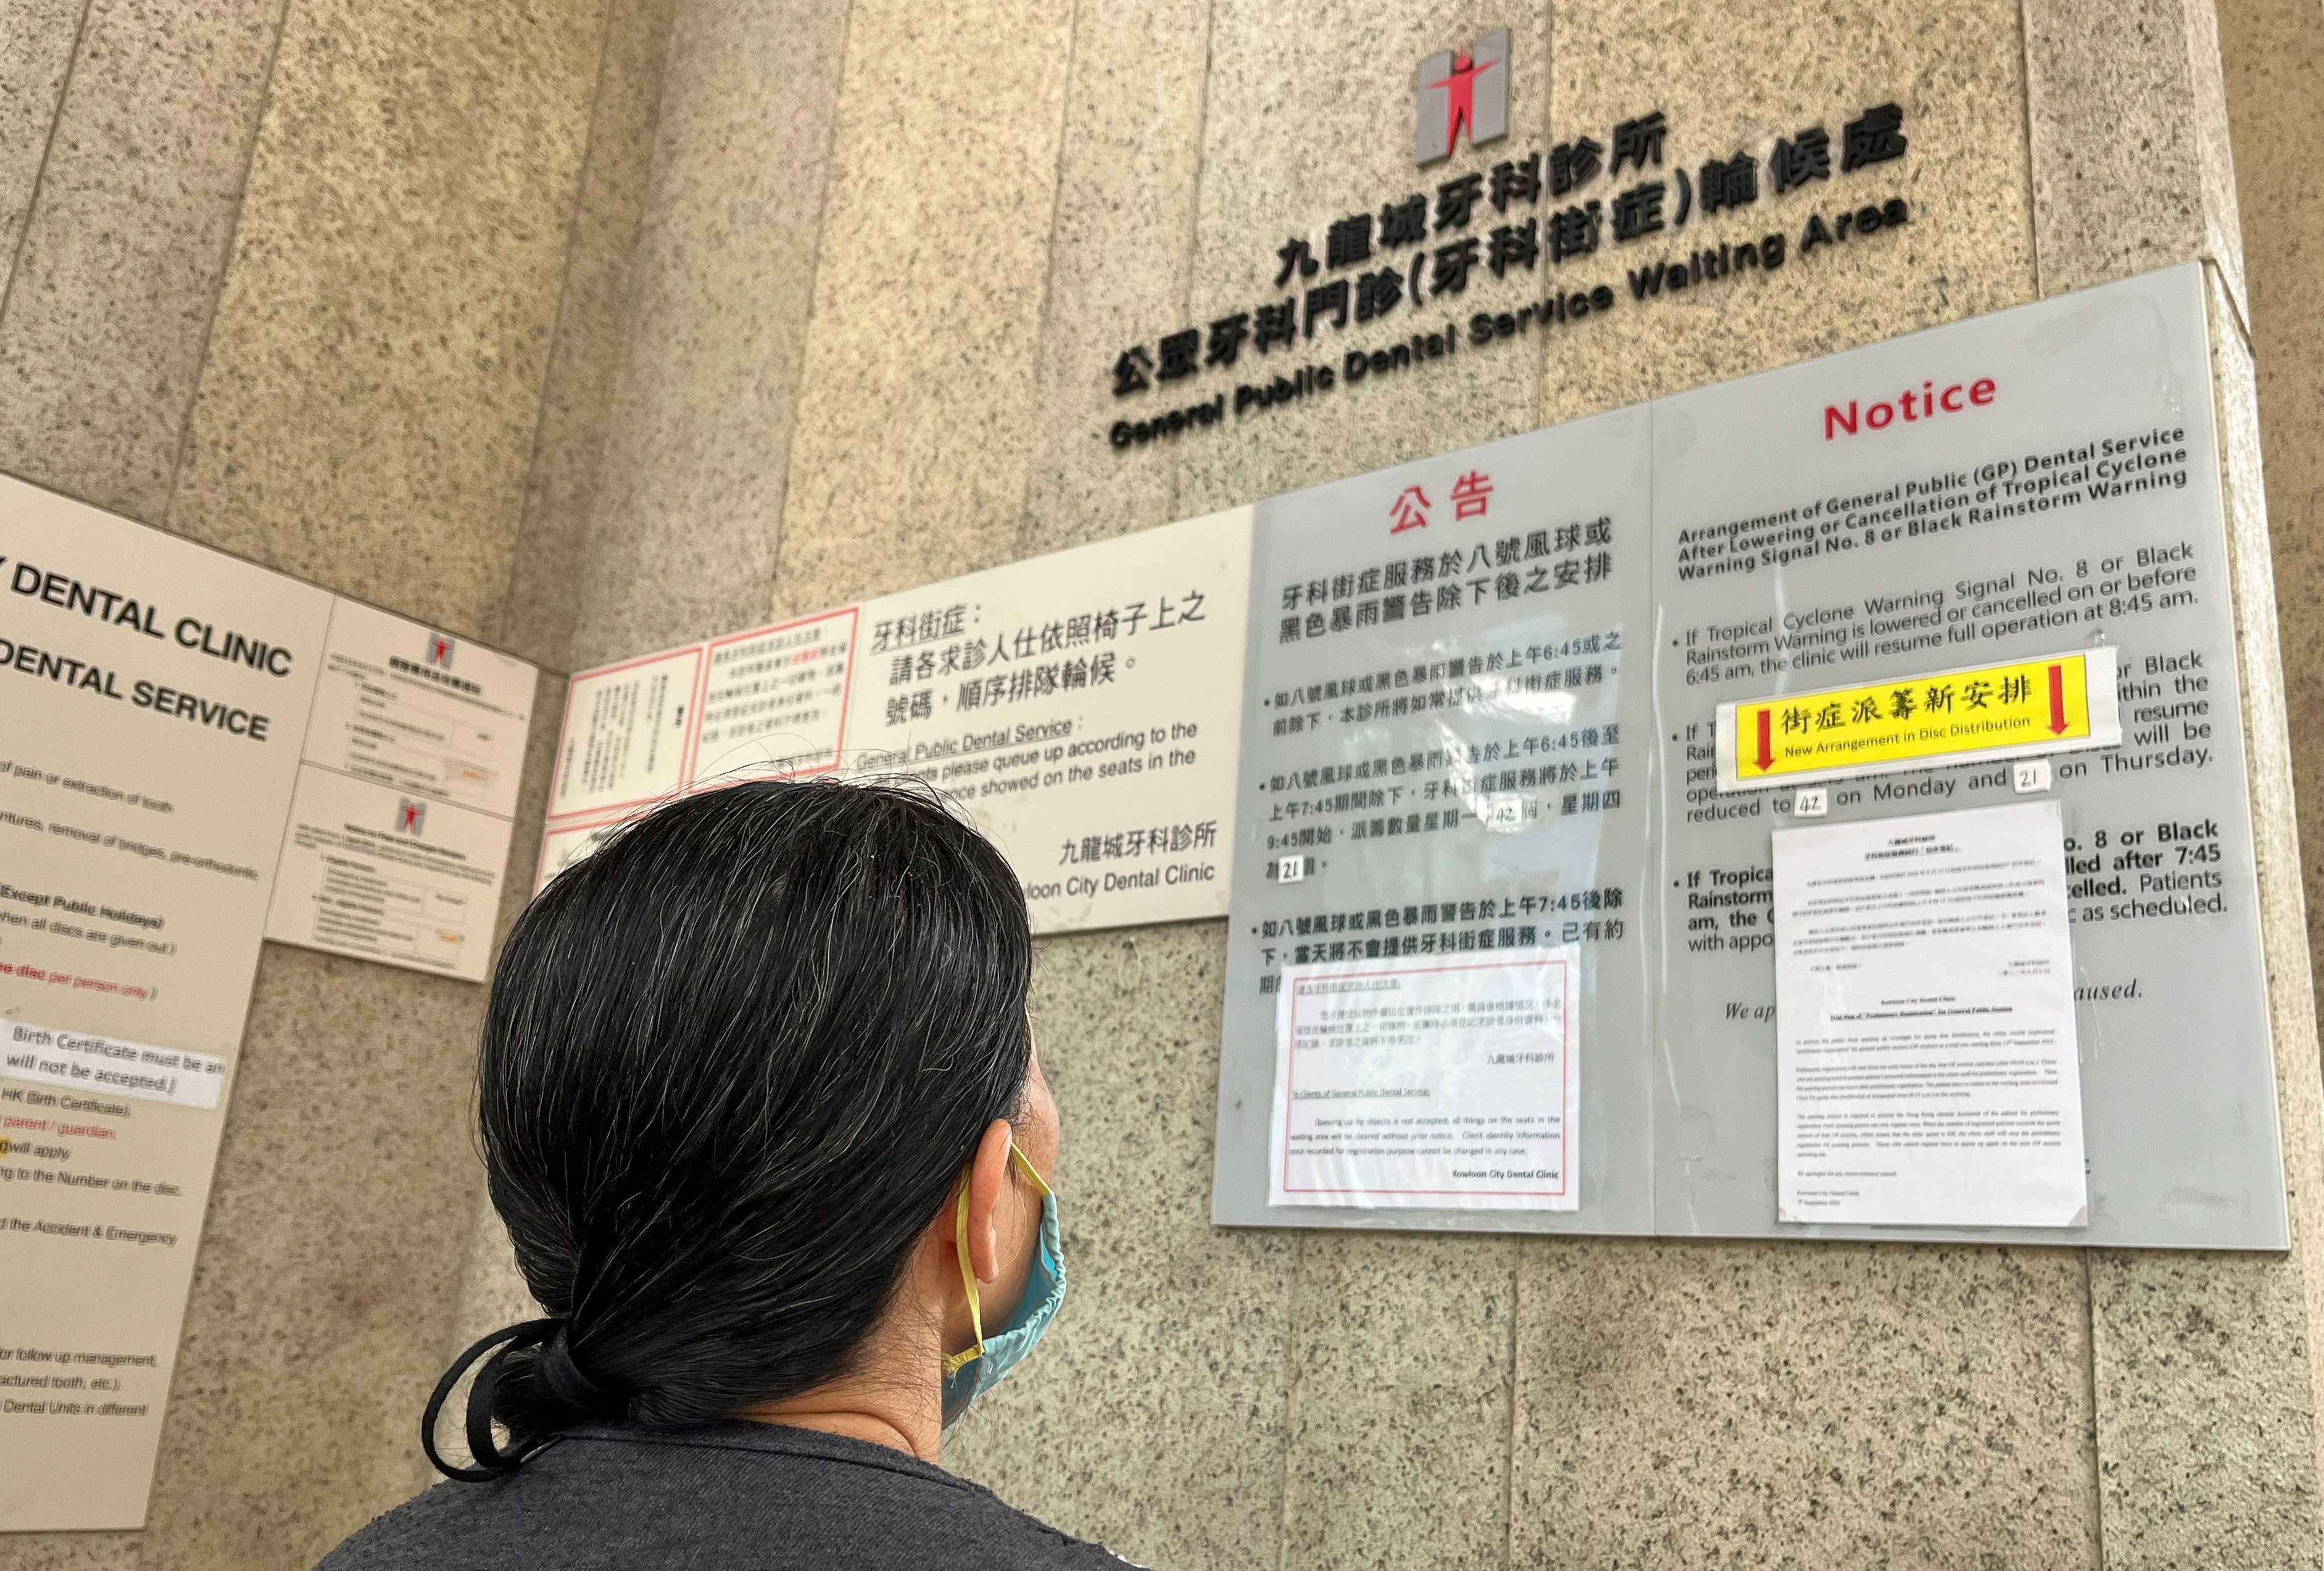 A Hong Kong health official has said authorities are working with contractors on a online booking system for public dental services. Photo: Sammy Heung